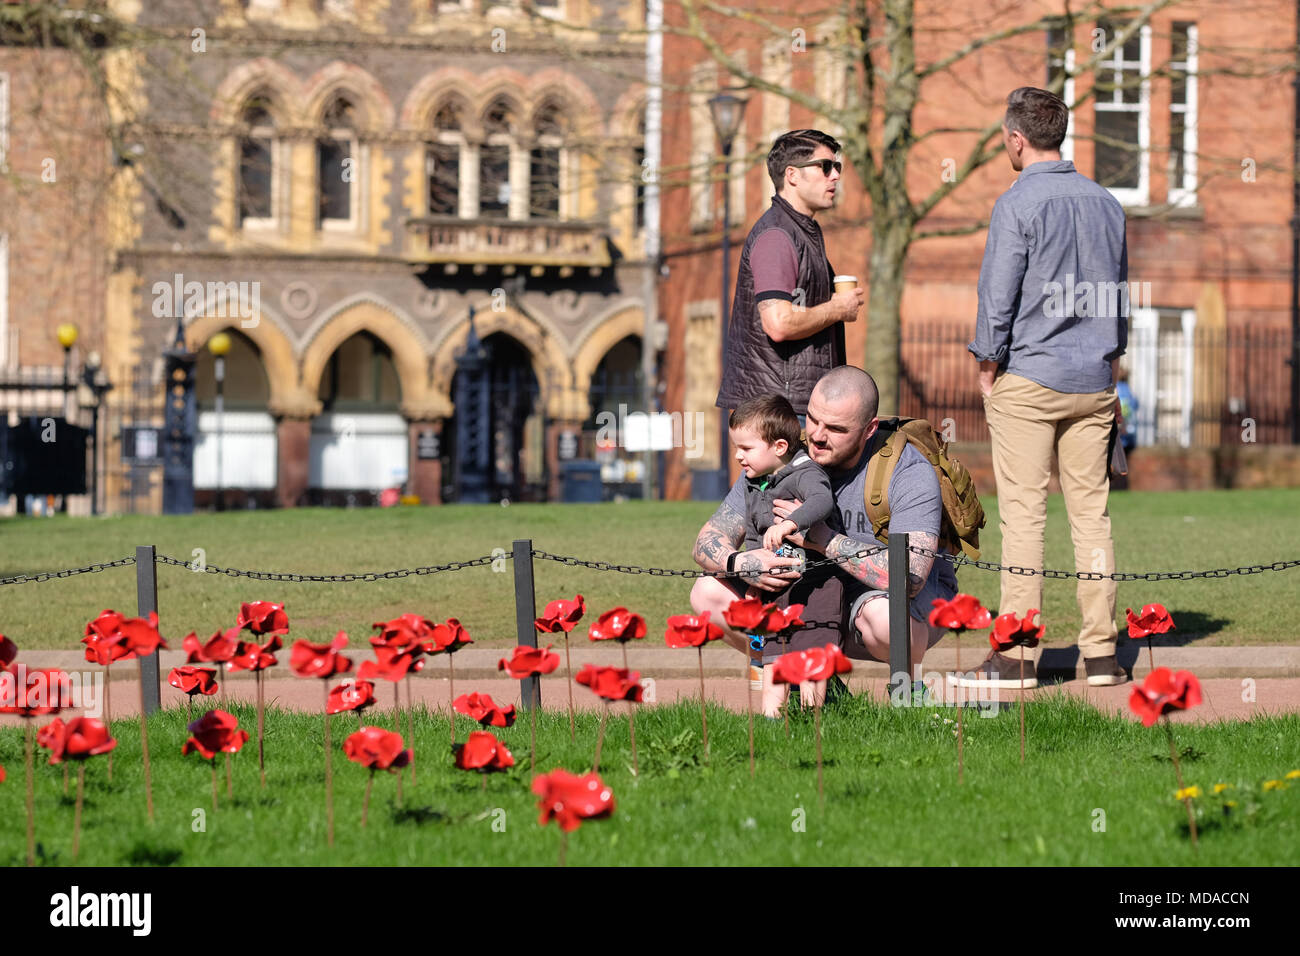 Hereford, Herefordshire - UK Weather - Thursday 19th April 2018  - Hot sunny Spring sunshine in Hereford with local temperatures up to a warm 23c - visitors enjoy the Weeping Window ceramic poppy display at Hereford cathedral which commemorates WW1 1914-1918. The Weeping Window display at Hereford cathedral finishes on April 29th - Photo Steven May / Alamy Live News Stock Photo